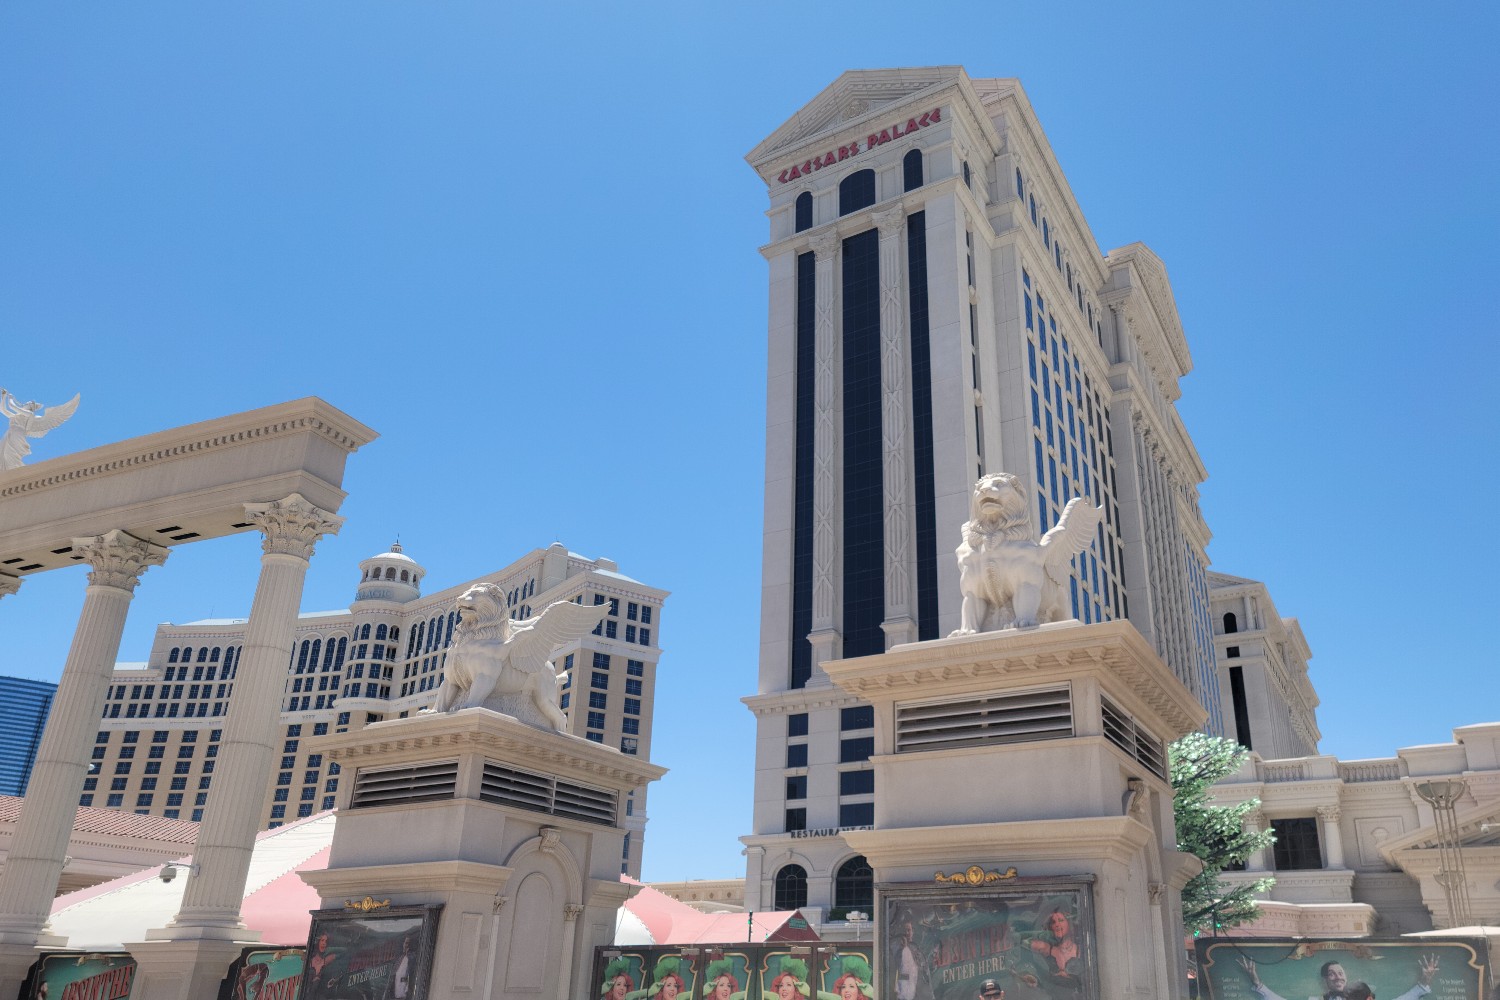 Here's your exclusive look inside Caesars Palace: the Las Vegas